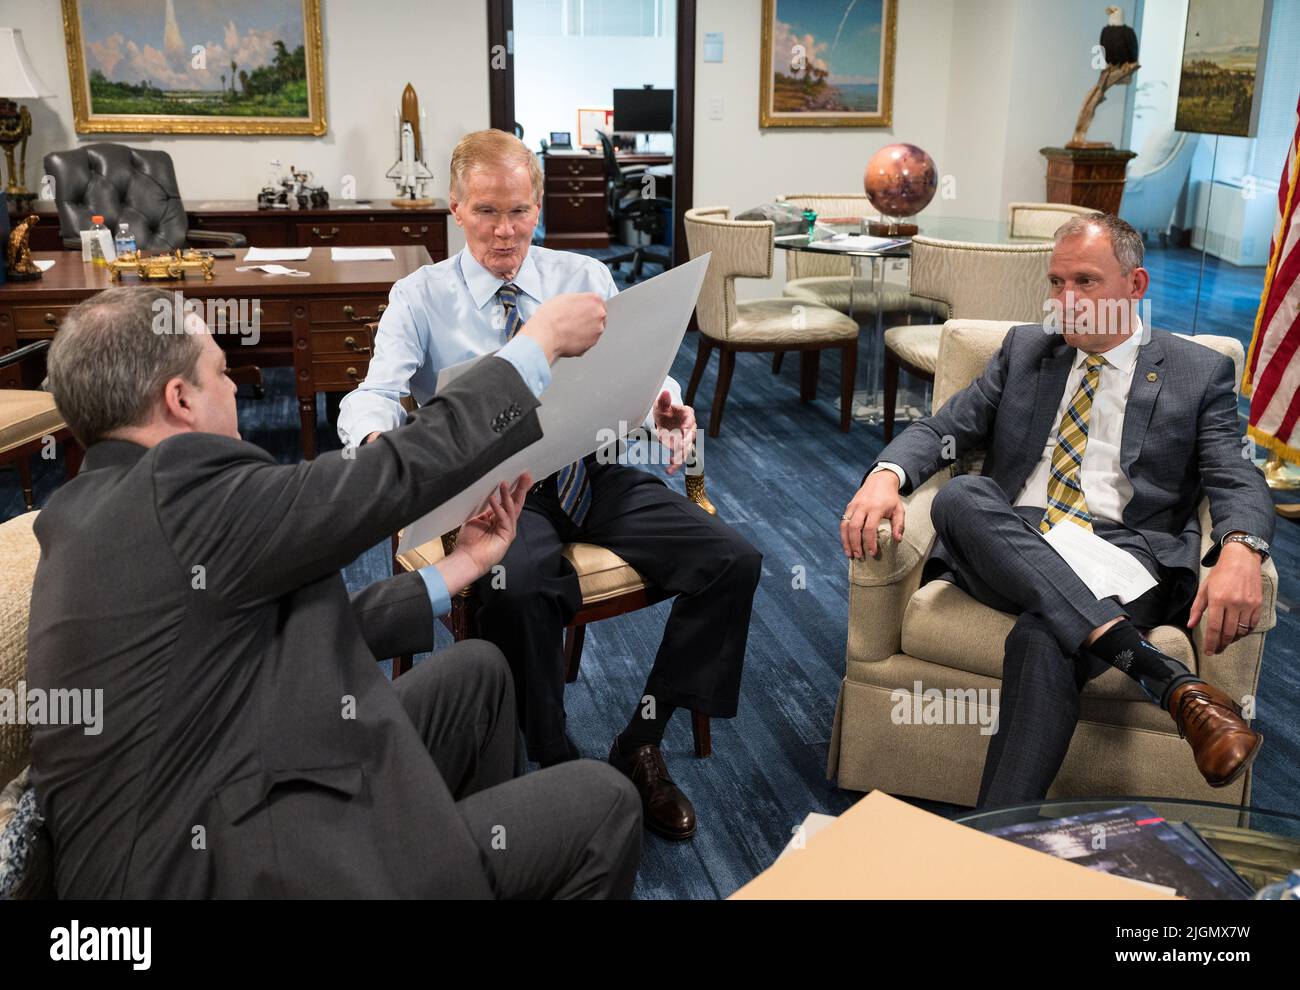 NASA Administrator Bill Nelson, center, and Associate Administrator for NASA's Science Mission Directorate, Thomas Zurbuchen, right, react to the first full-color images from NASA's James Webb Space Telescope in a preview meeting with Webb project scientist at the Space Telescope Science Institute, Klaus Pontoppidan, left, Monday, July 11, 2022 at the Mary W. Jackson NASA Headquarters building in Washington. The first images and spectroscopic data from the world's largest and most powerful space telescope, set to be released July 11 and 12, will demonstrate Webb at its full power, as it begins Stock Photo